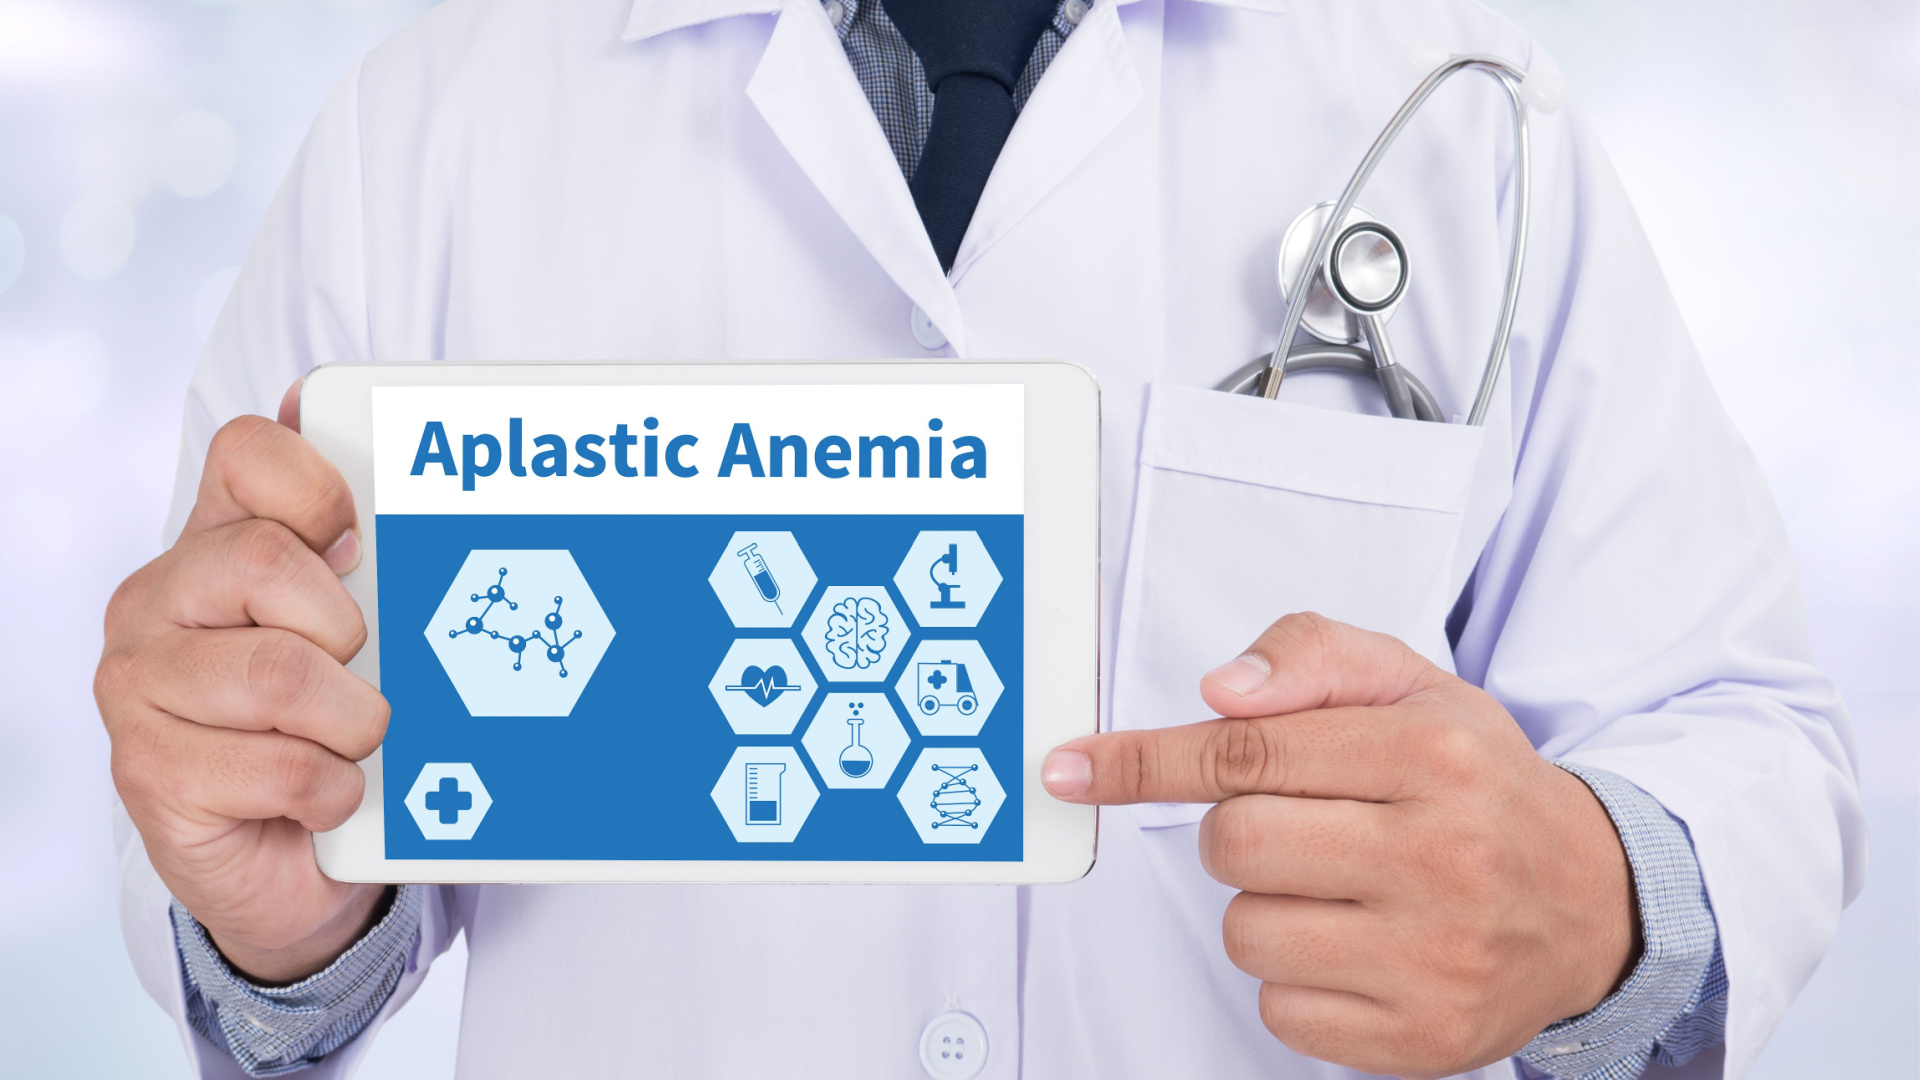 This Transplant Method Shows Promise for Aplastic Anemia in Adults